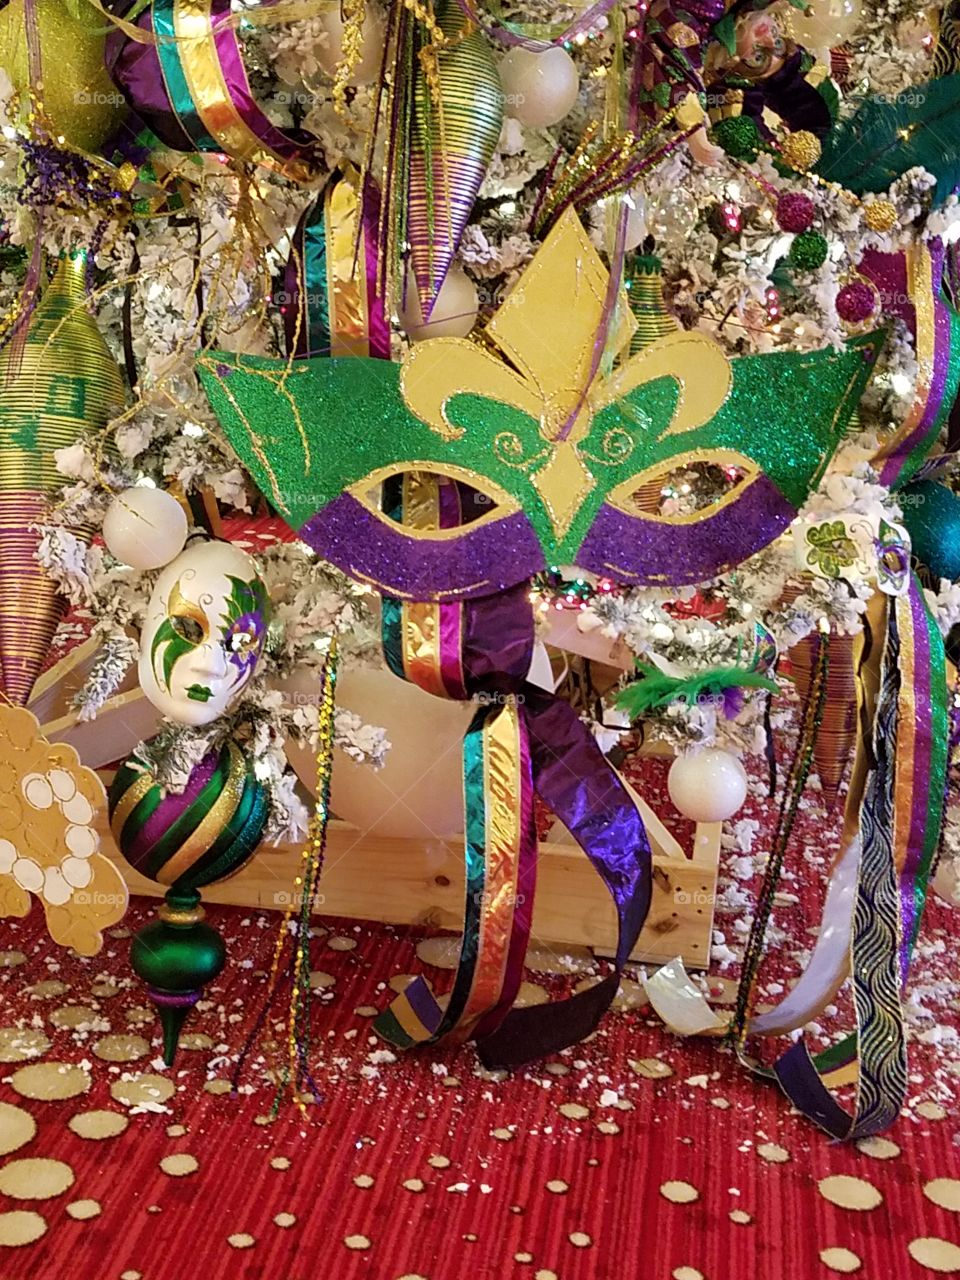 purple, masks,ribbons,beads,feathers and other decorations  for Mardi Gras